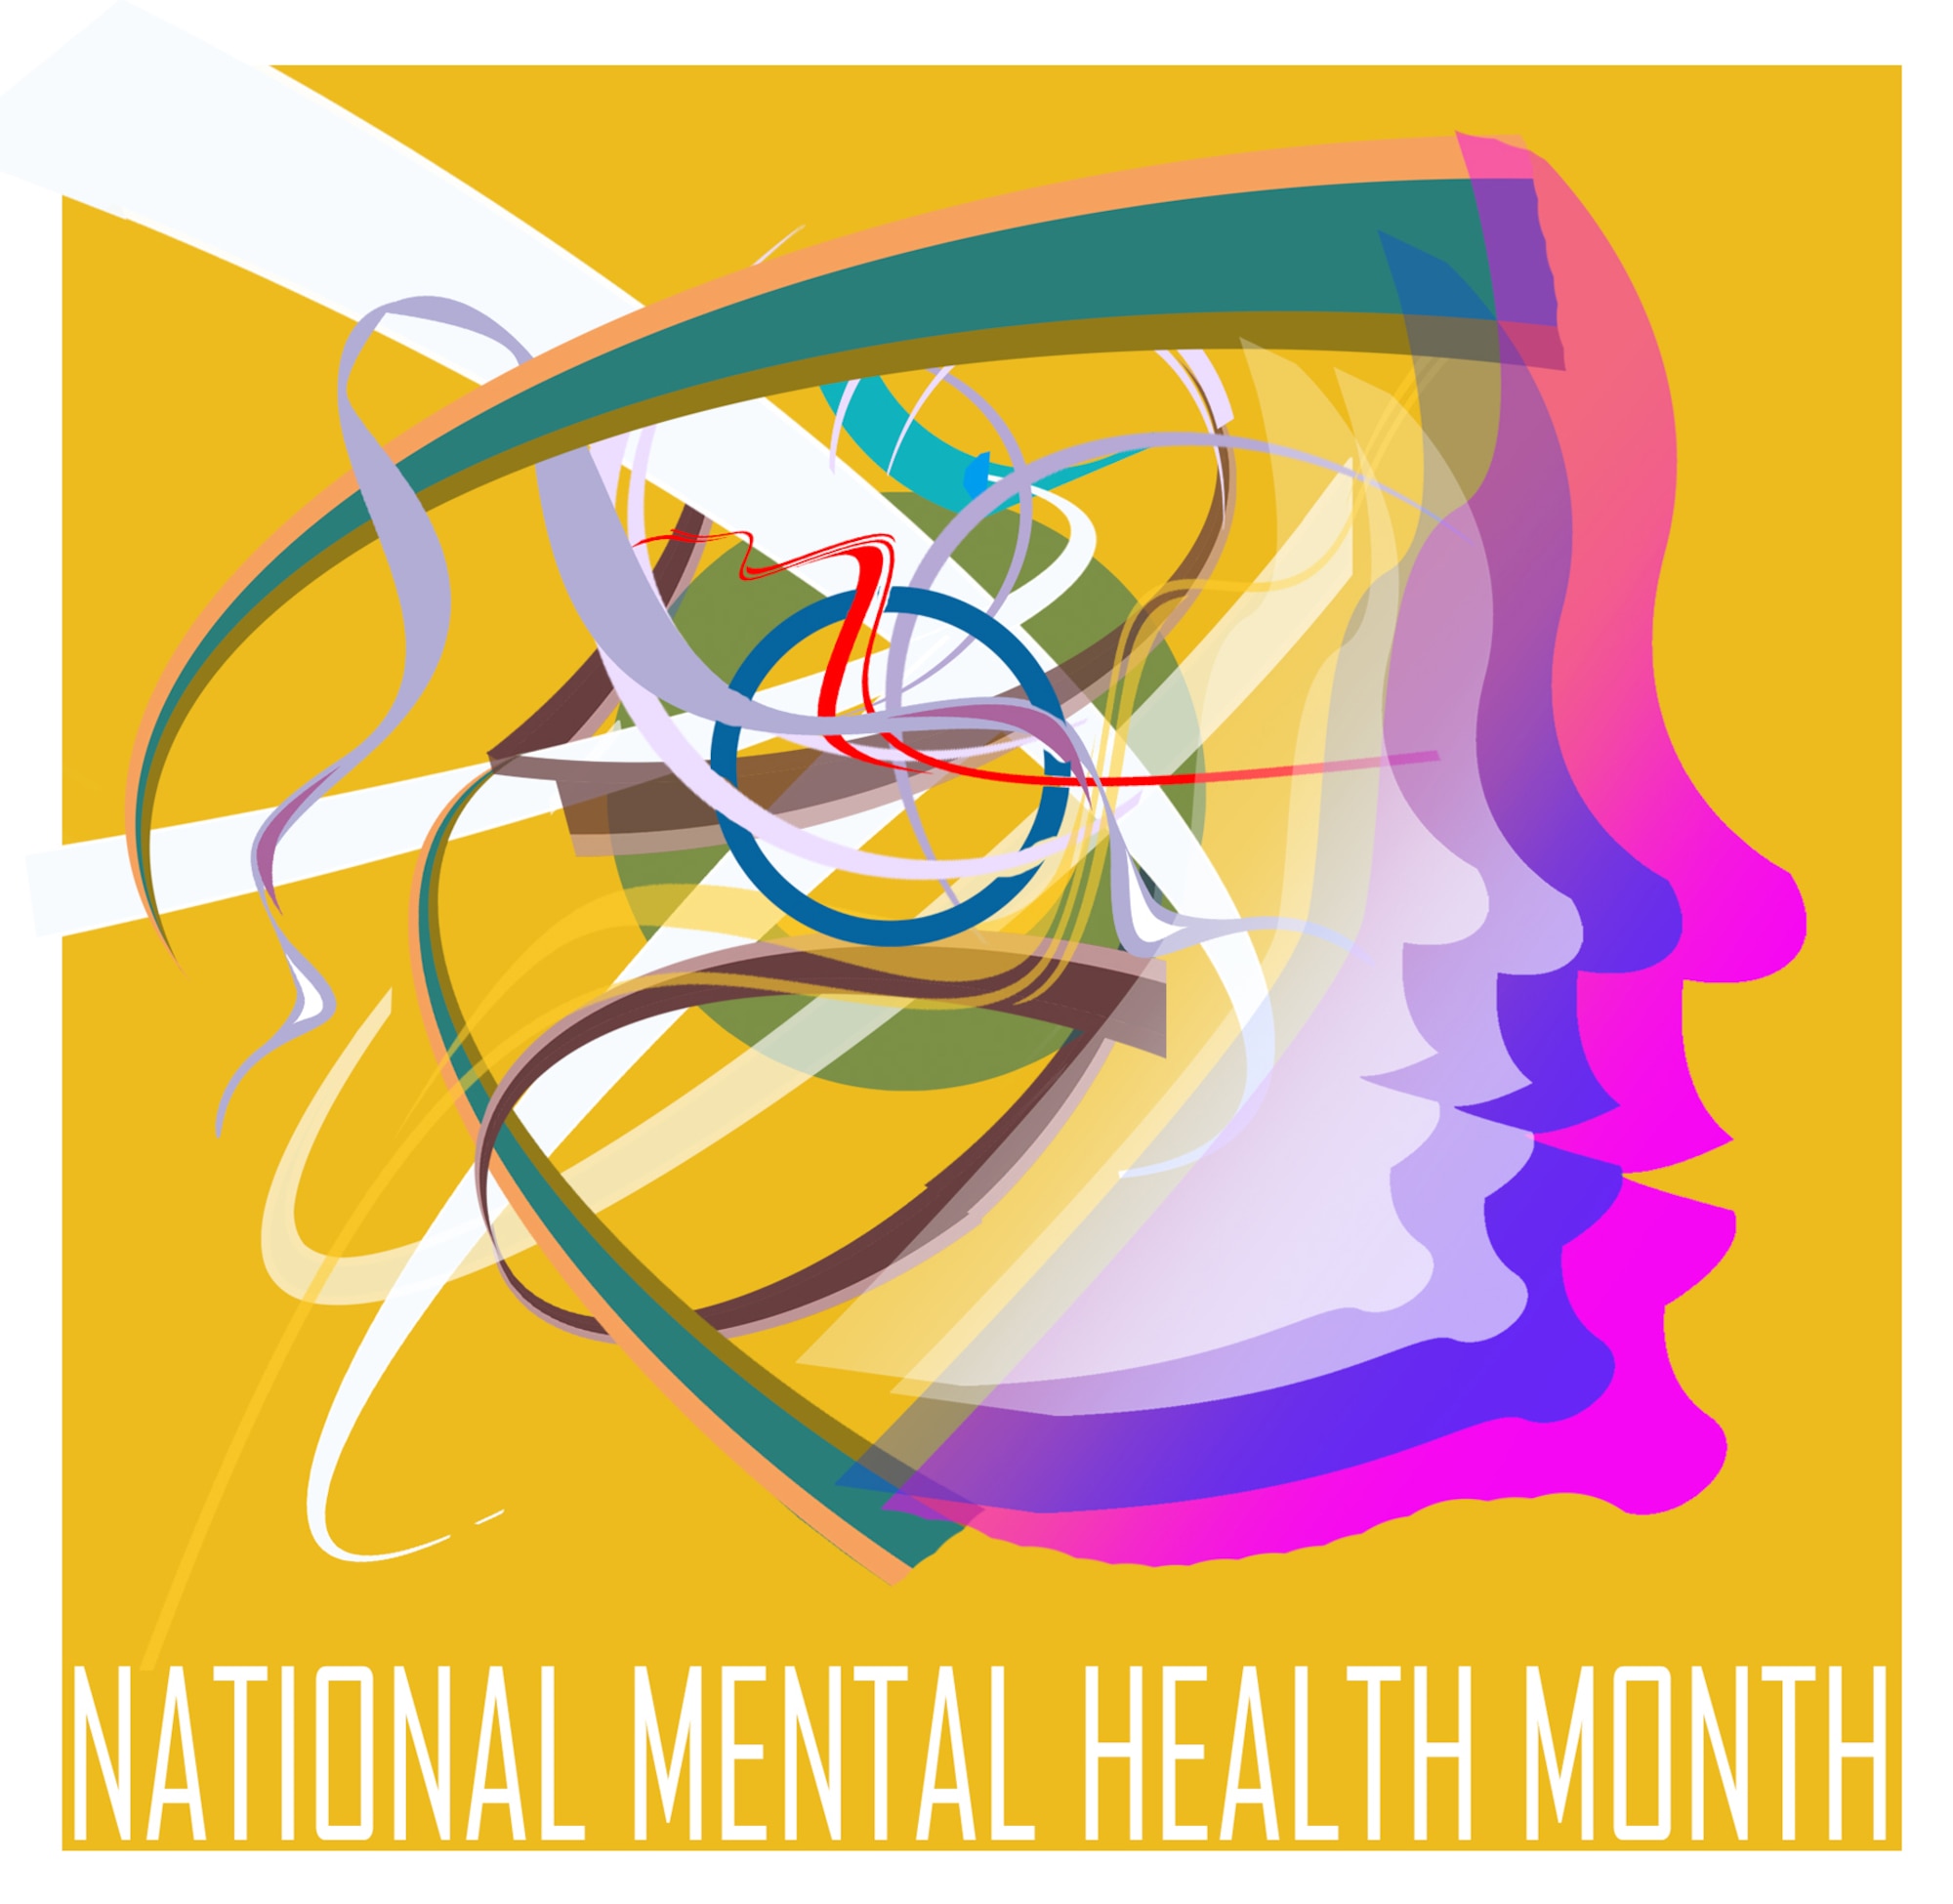 OFFUTT AIR FORCE BASE, Neb. -- May is National Mental Health Month and according to the professionals of the 55th Medical Group, people can ensure good mental health by reducing stress. Stress can be reduced by getting enough sleep, eating right, exercising and eliminating destructive habits. U.S. Air Force Graphic by Jeff W. Gates 